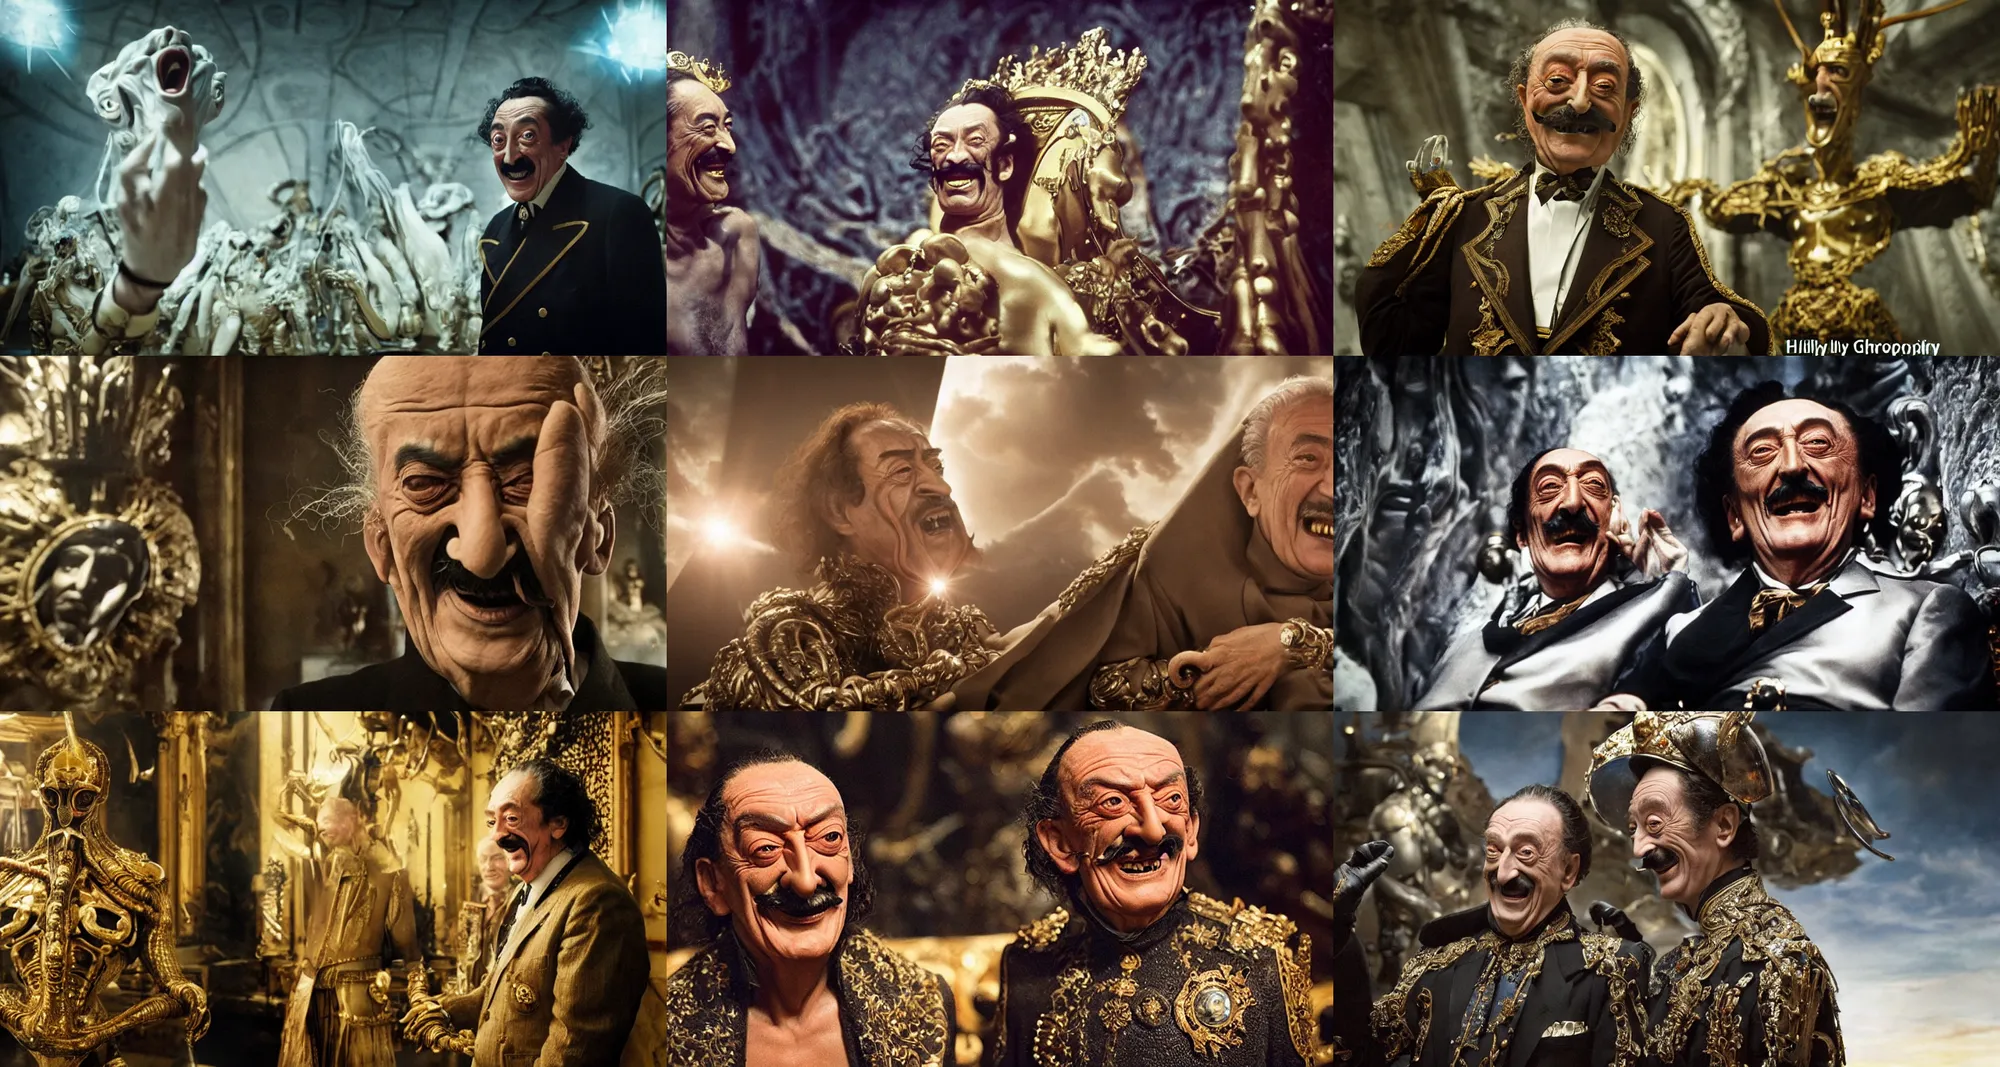 Prompt: laughing salvador dali in the role of emperor | prometheus movie by ridley scott with cinematogrophy of christopher doyle and art direction by hans giger, anamorphic bokeh and lens flares, 8 k, higly detailed masterpiece